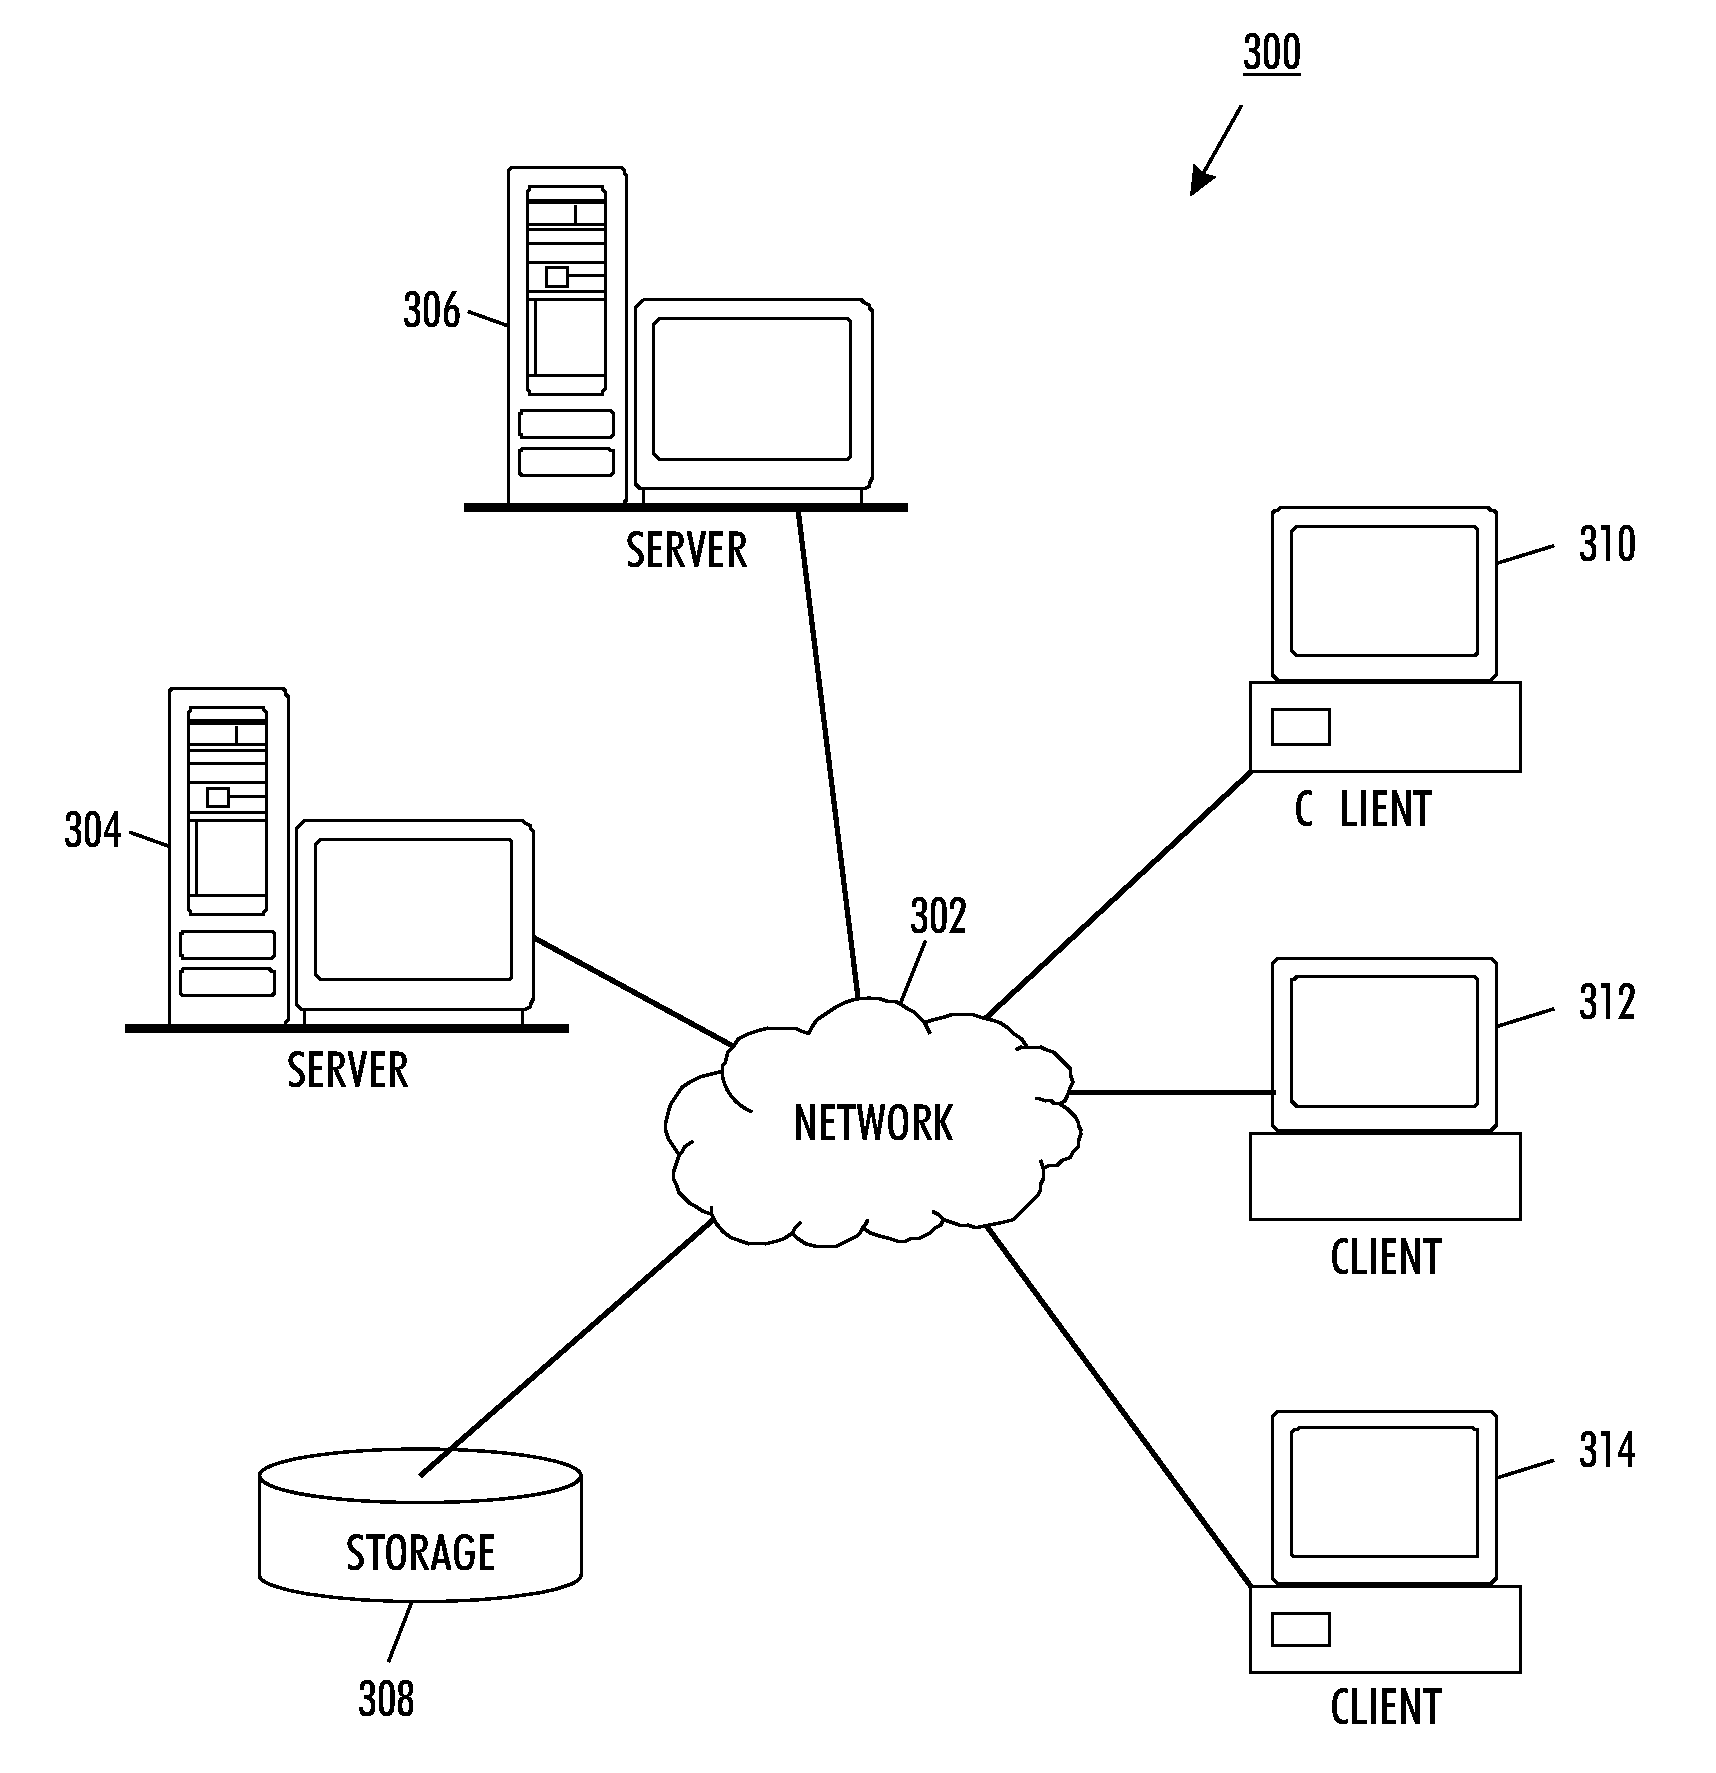 Test and answer key generation system and method